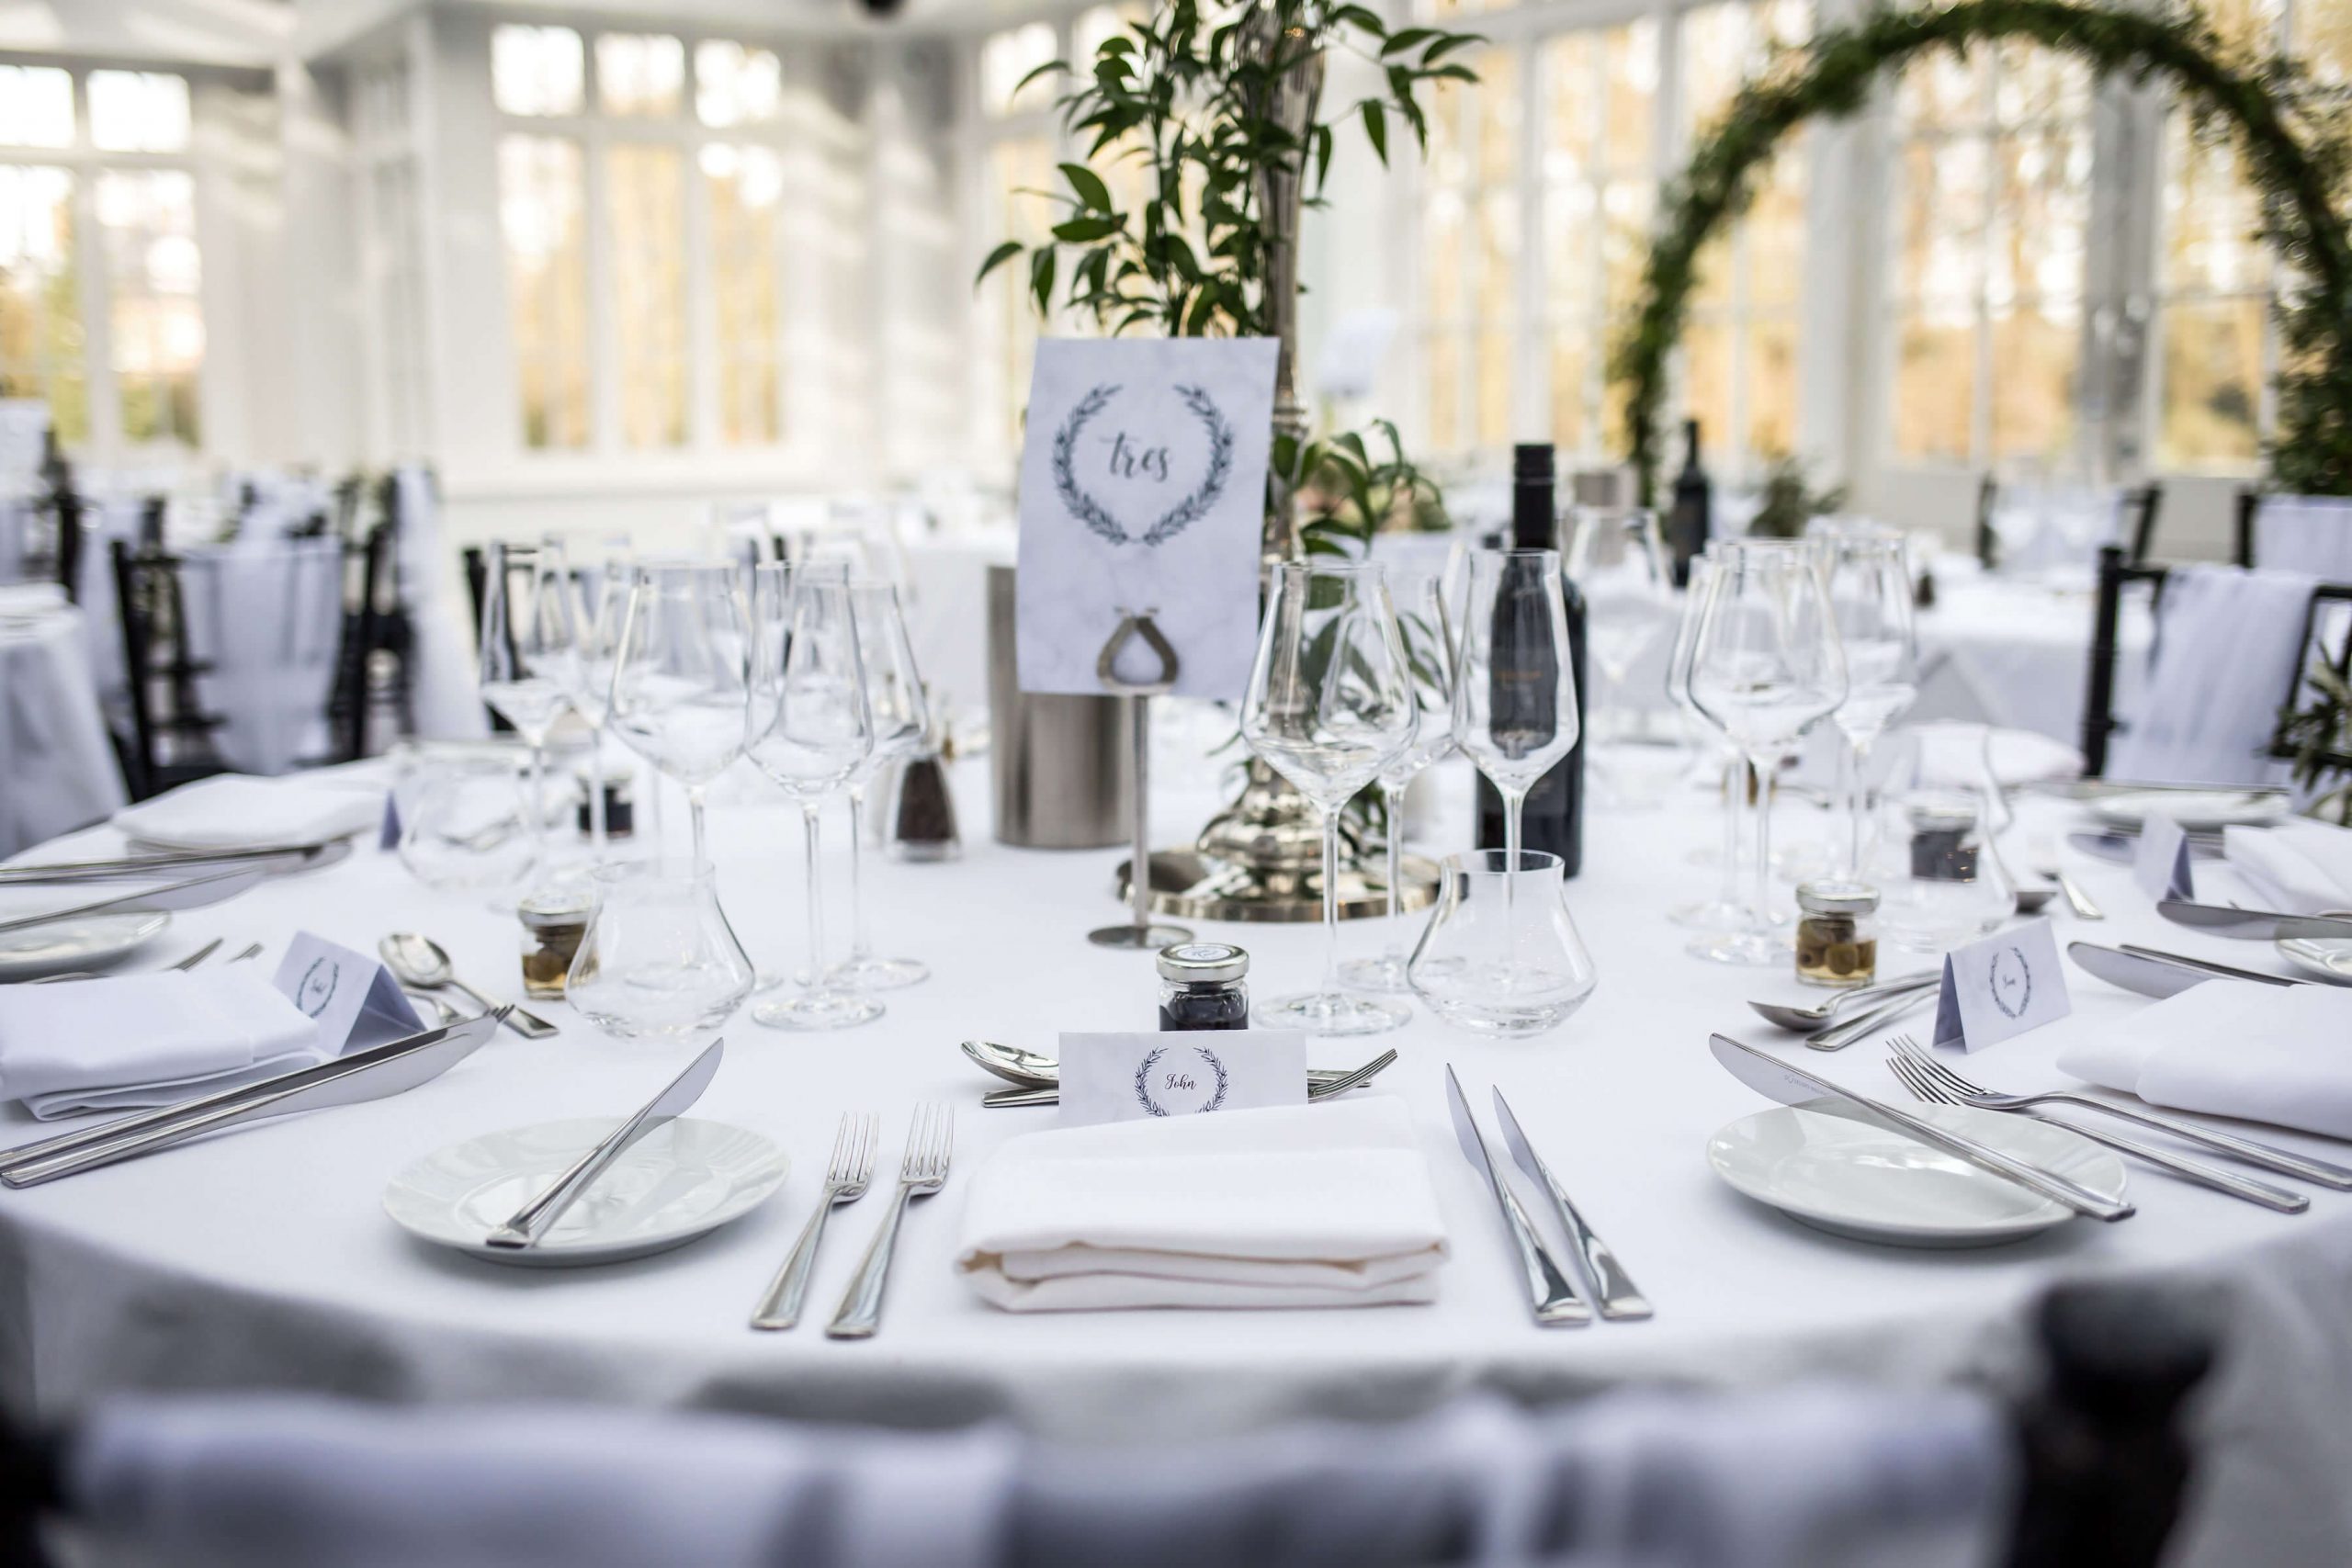 Crisp white linen table cloths with gleaming white crockery, sparkling glassware and polished cutlery on tables at Swynford Manor